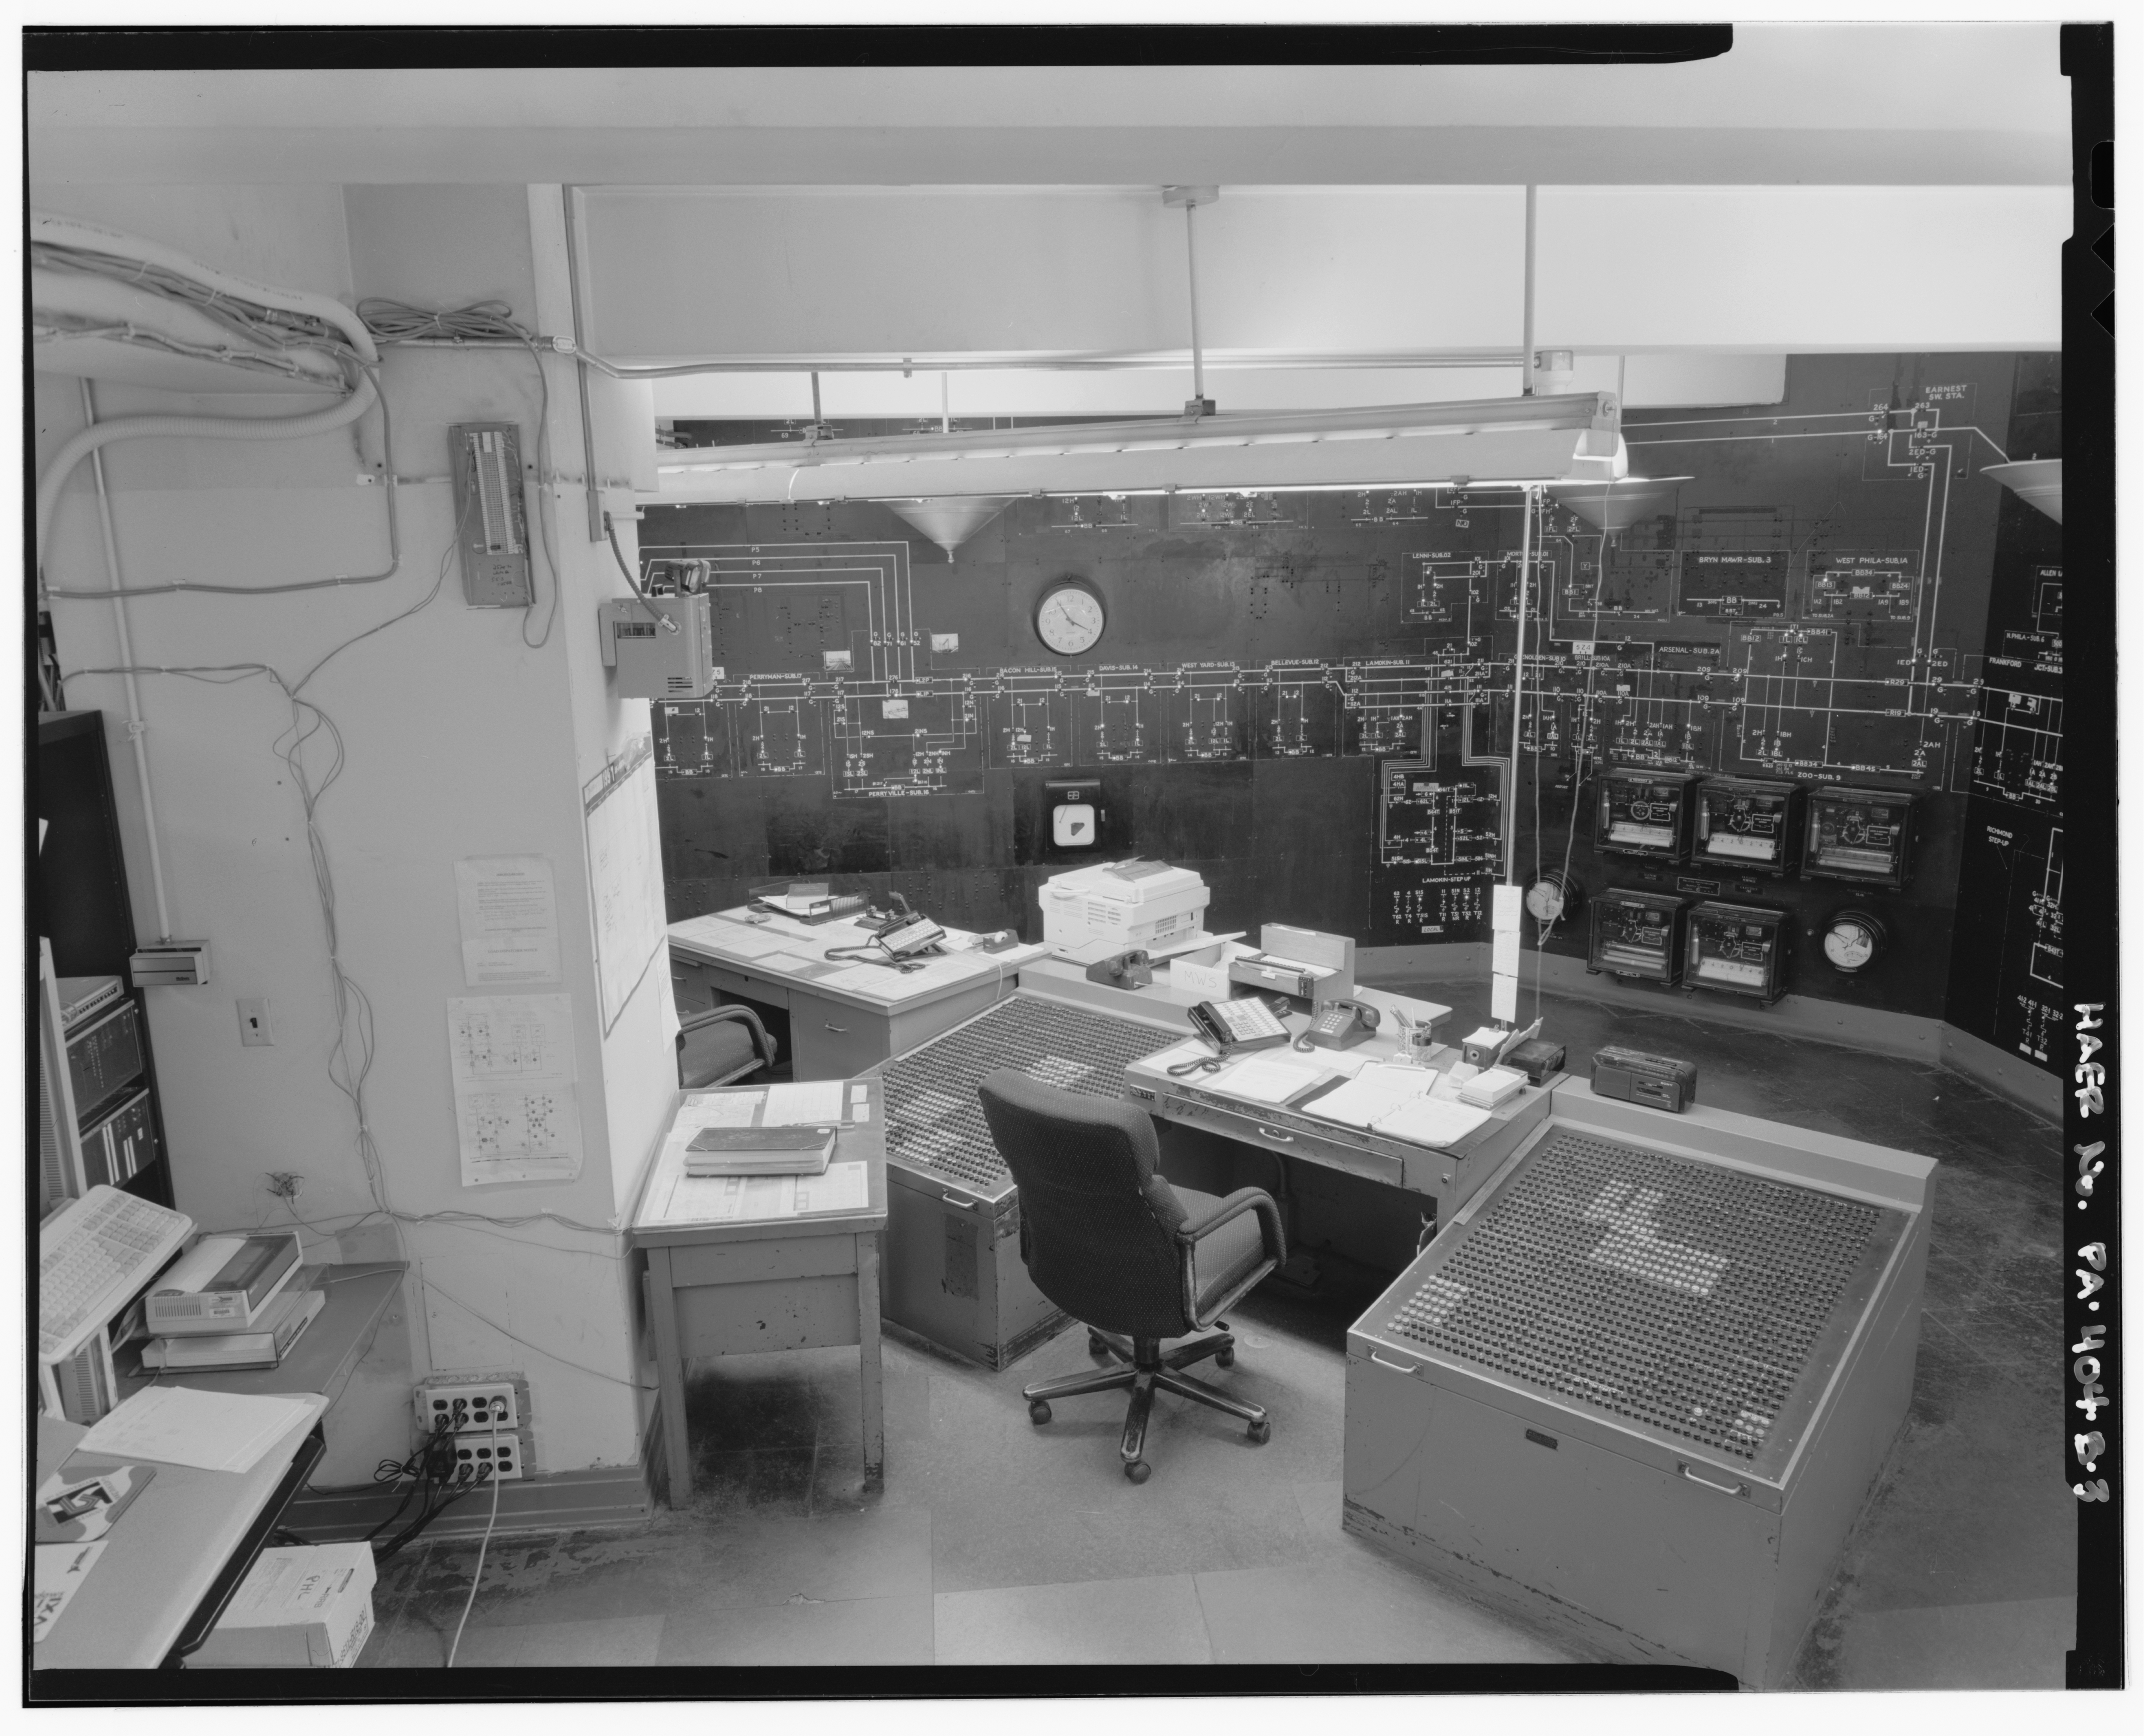 A high-angle black and white photograph of a control room.
       On the left, mostly out of frame, are various computer peripherals,
       a printer, and a rack of telecommunications equipment.
       To the right of that is a large structural column sparsely scattered with
       power plugs and a single 66-type telephone punchdown block mounted on a
       small sheet of plywood.
       To the right of that, in the foreground, is a desk with scattered papers,
       telephones, and a boombox.
       The left and right sides of the desk contain panels of buttons arranged
       in a grid.
       In the background of the desk is a model board with a single-line diagram
       of an electrical network, various pieces of telemetry equipment like
       chart recorders and meters in a cluster, and a clock.